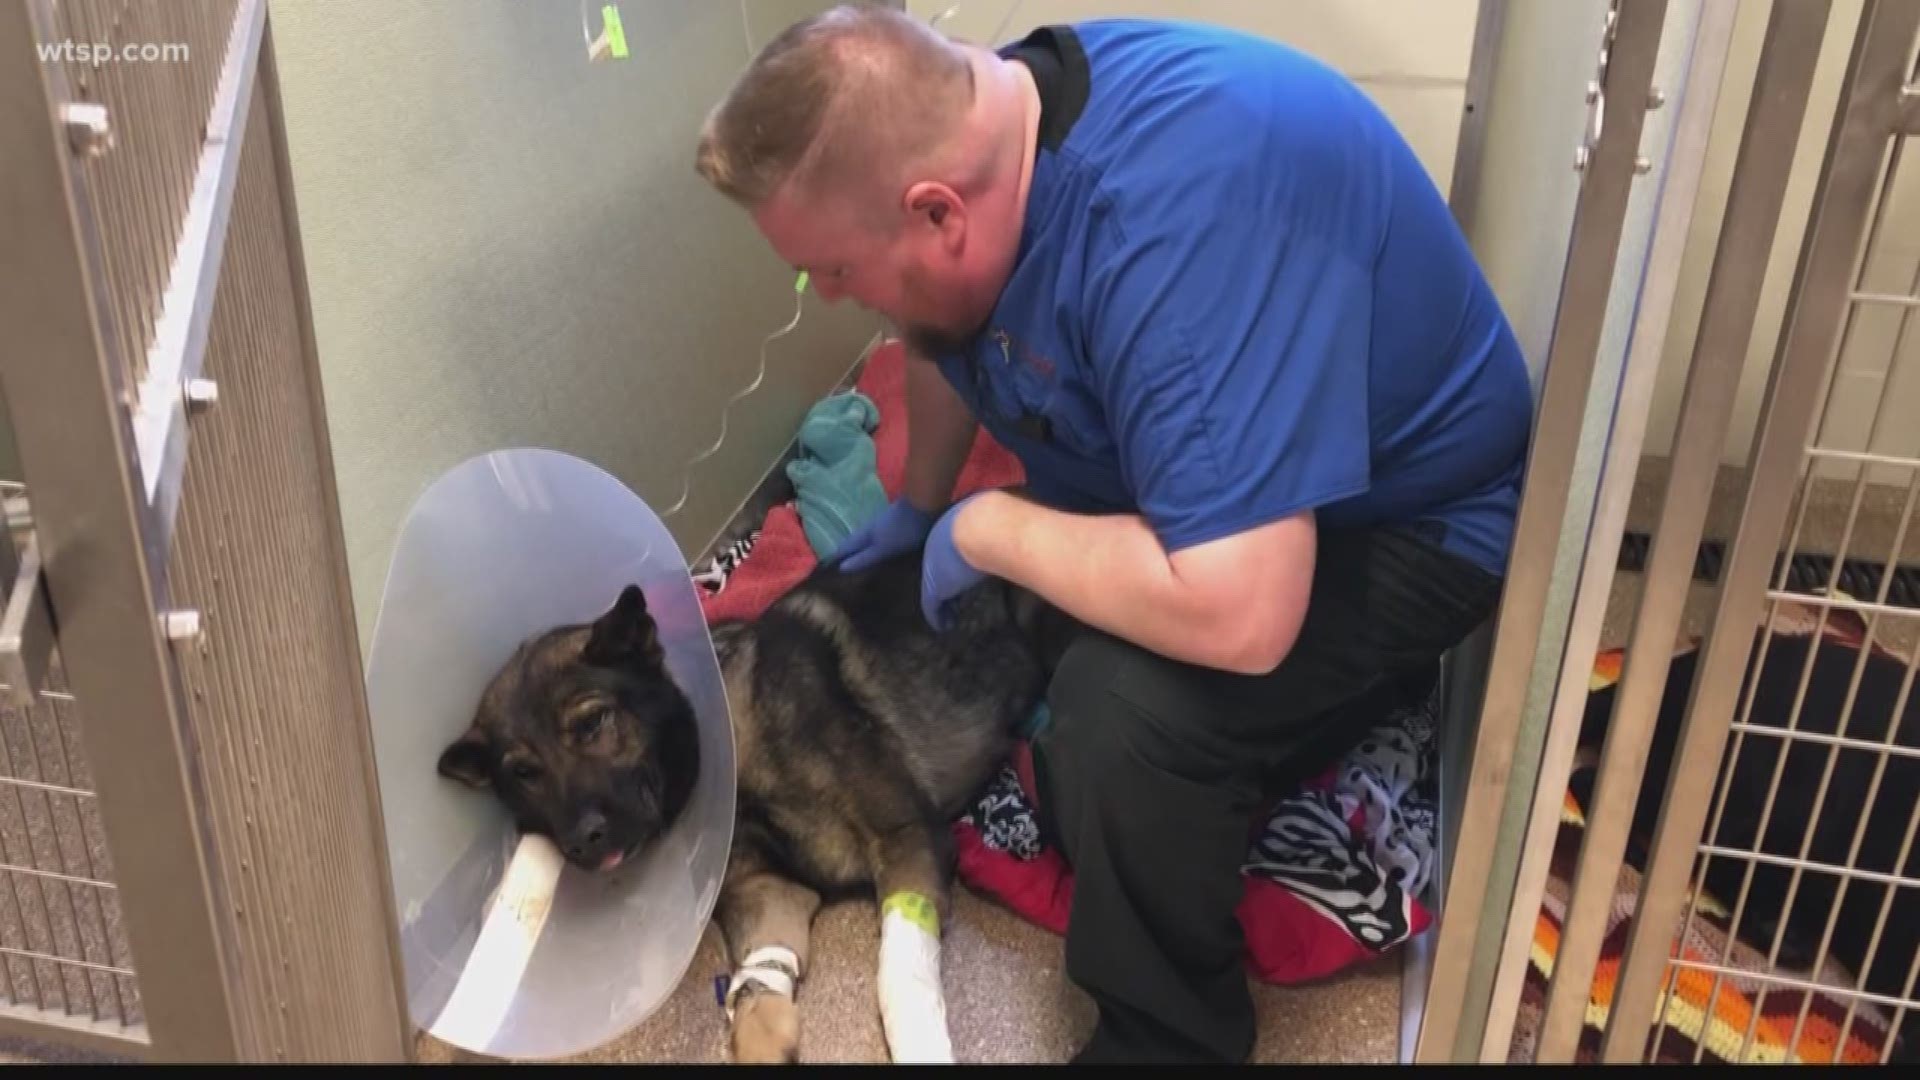 St. Petersburg Police K-9 ‘Titan’ is expected to survive injuries he sustained in a shooting early Friday morning.

But officials say it is too early to know if Titan will recover well enough to ever get back on the street.